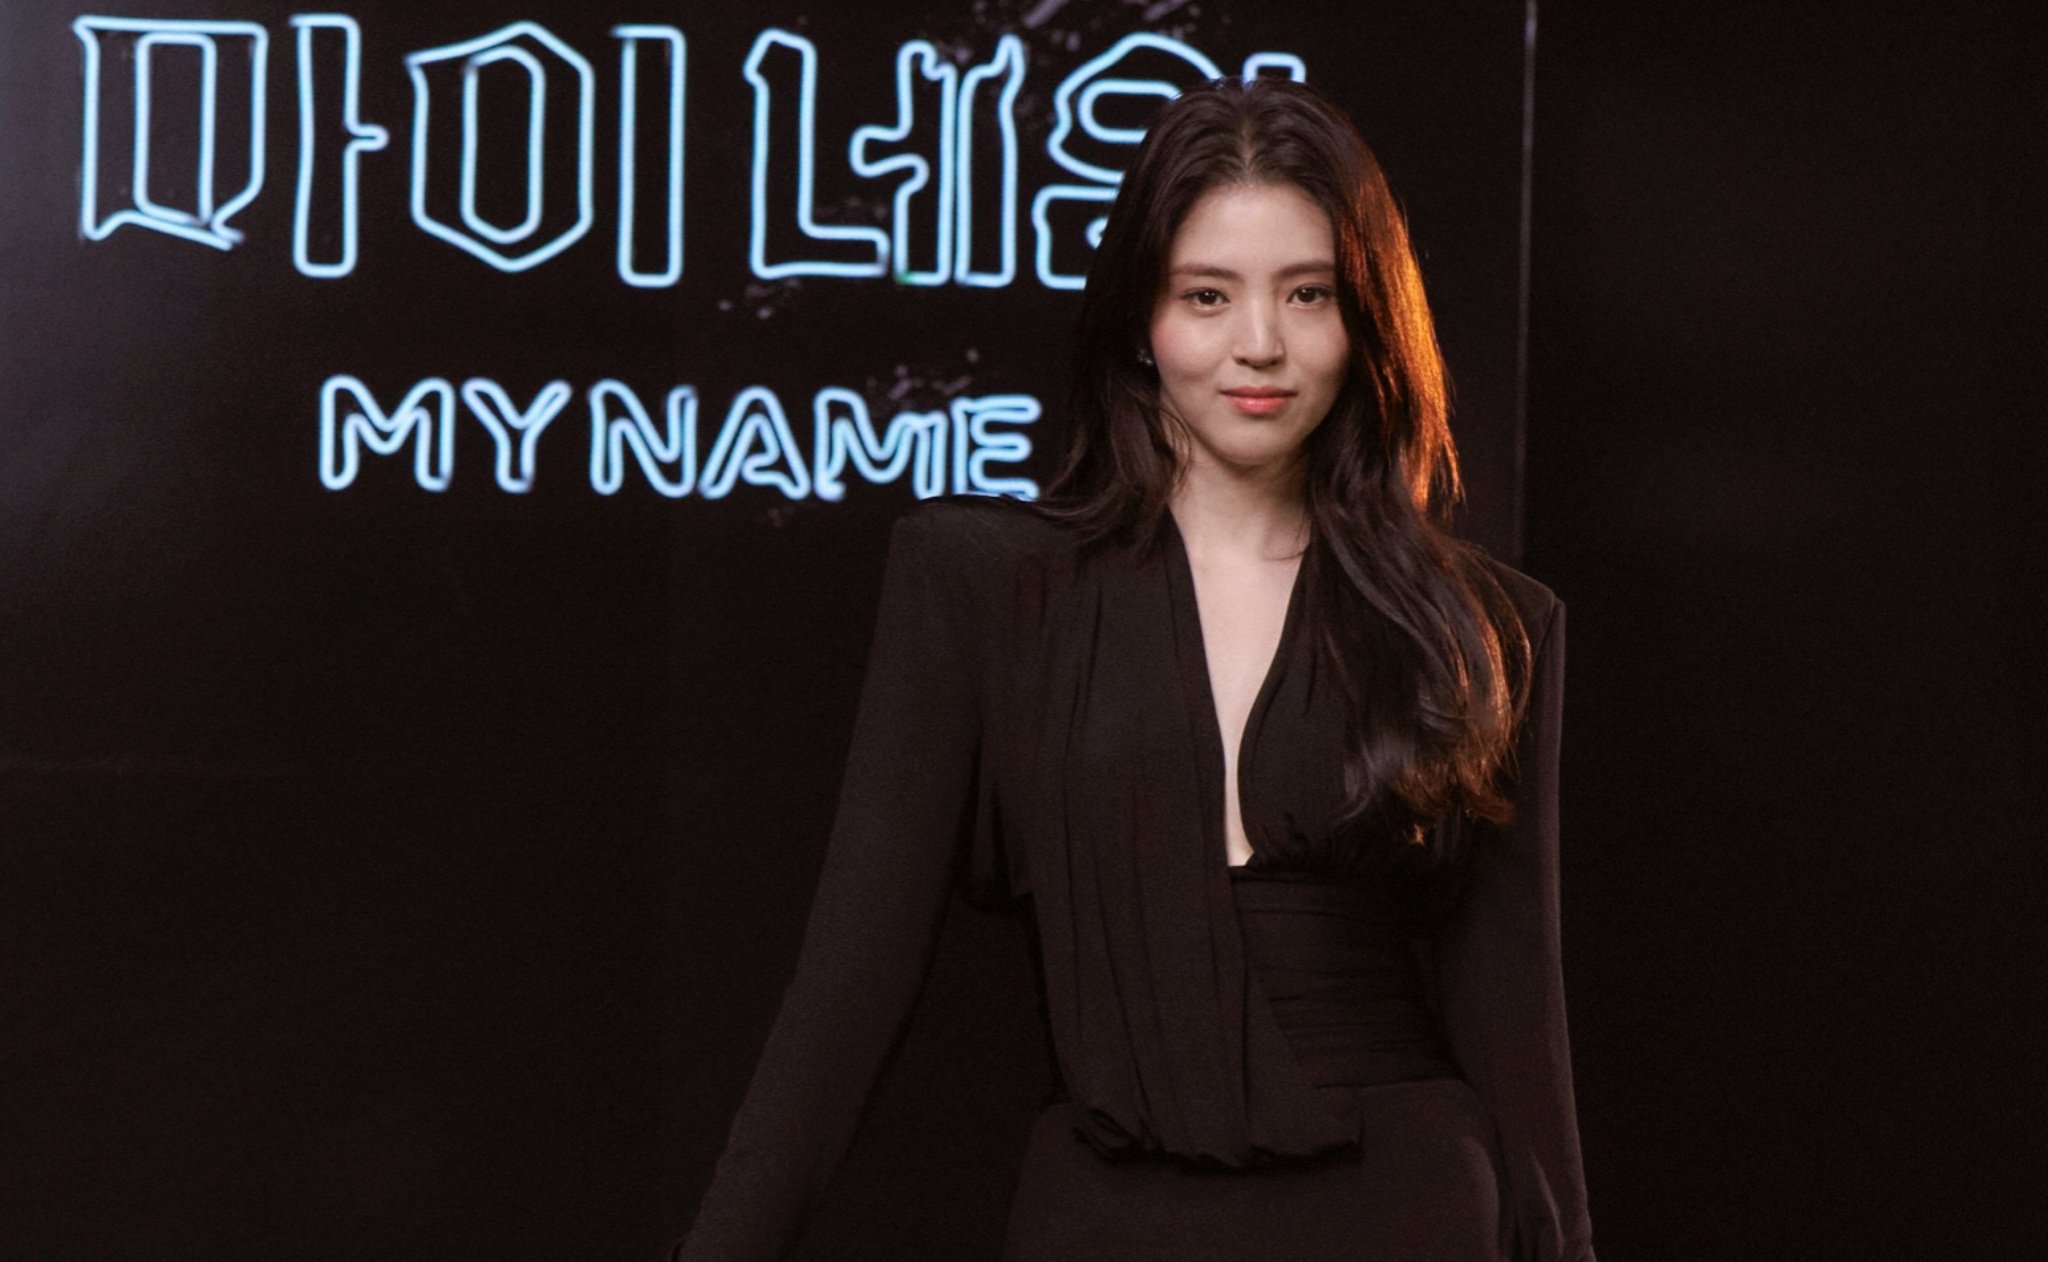 Han So-Hee for 'My Name' Netflix K-drama press event wearing black dress in front of illuminated sign